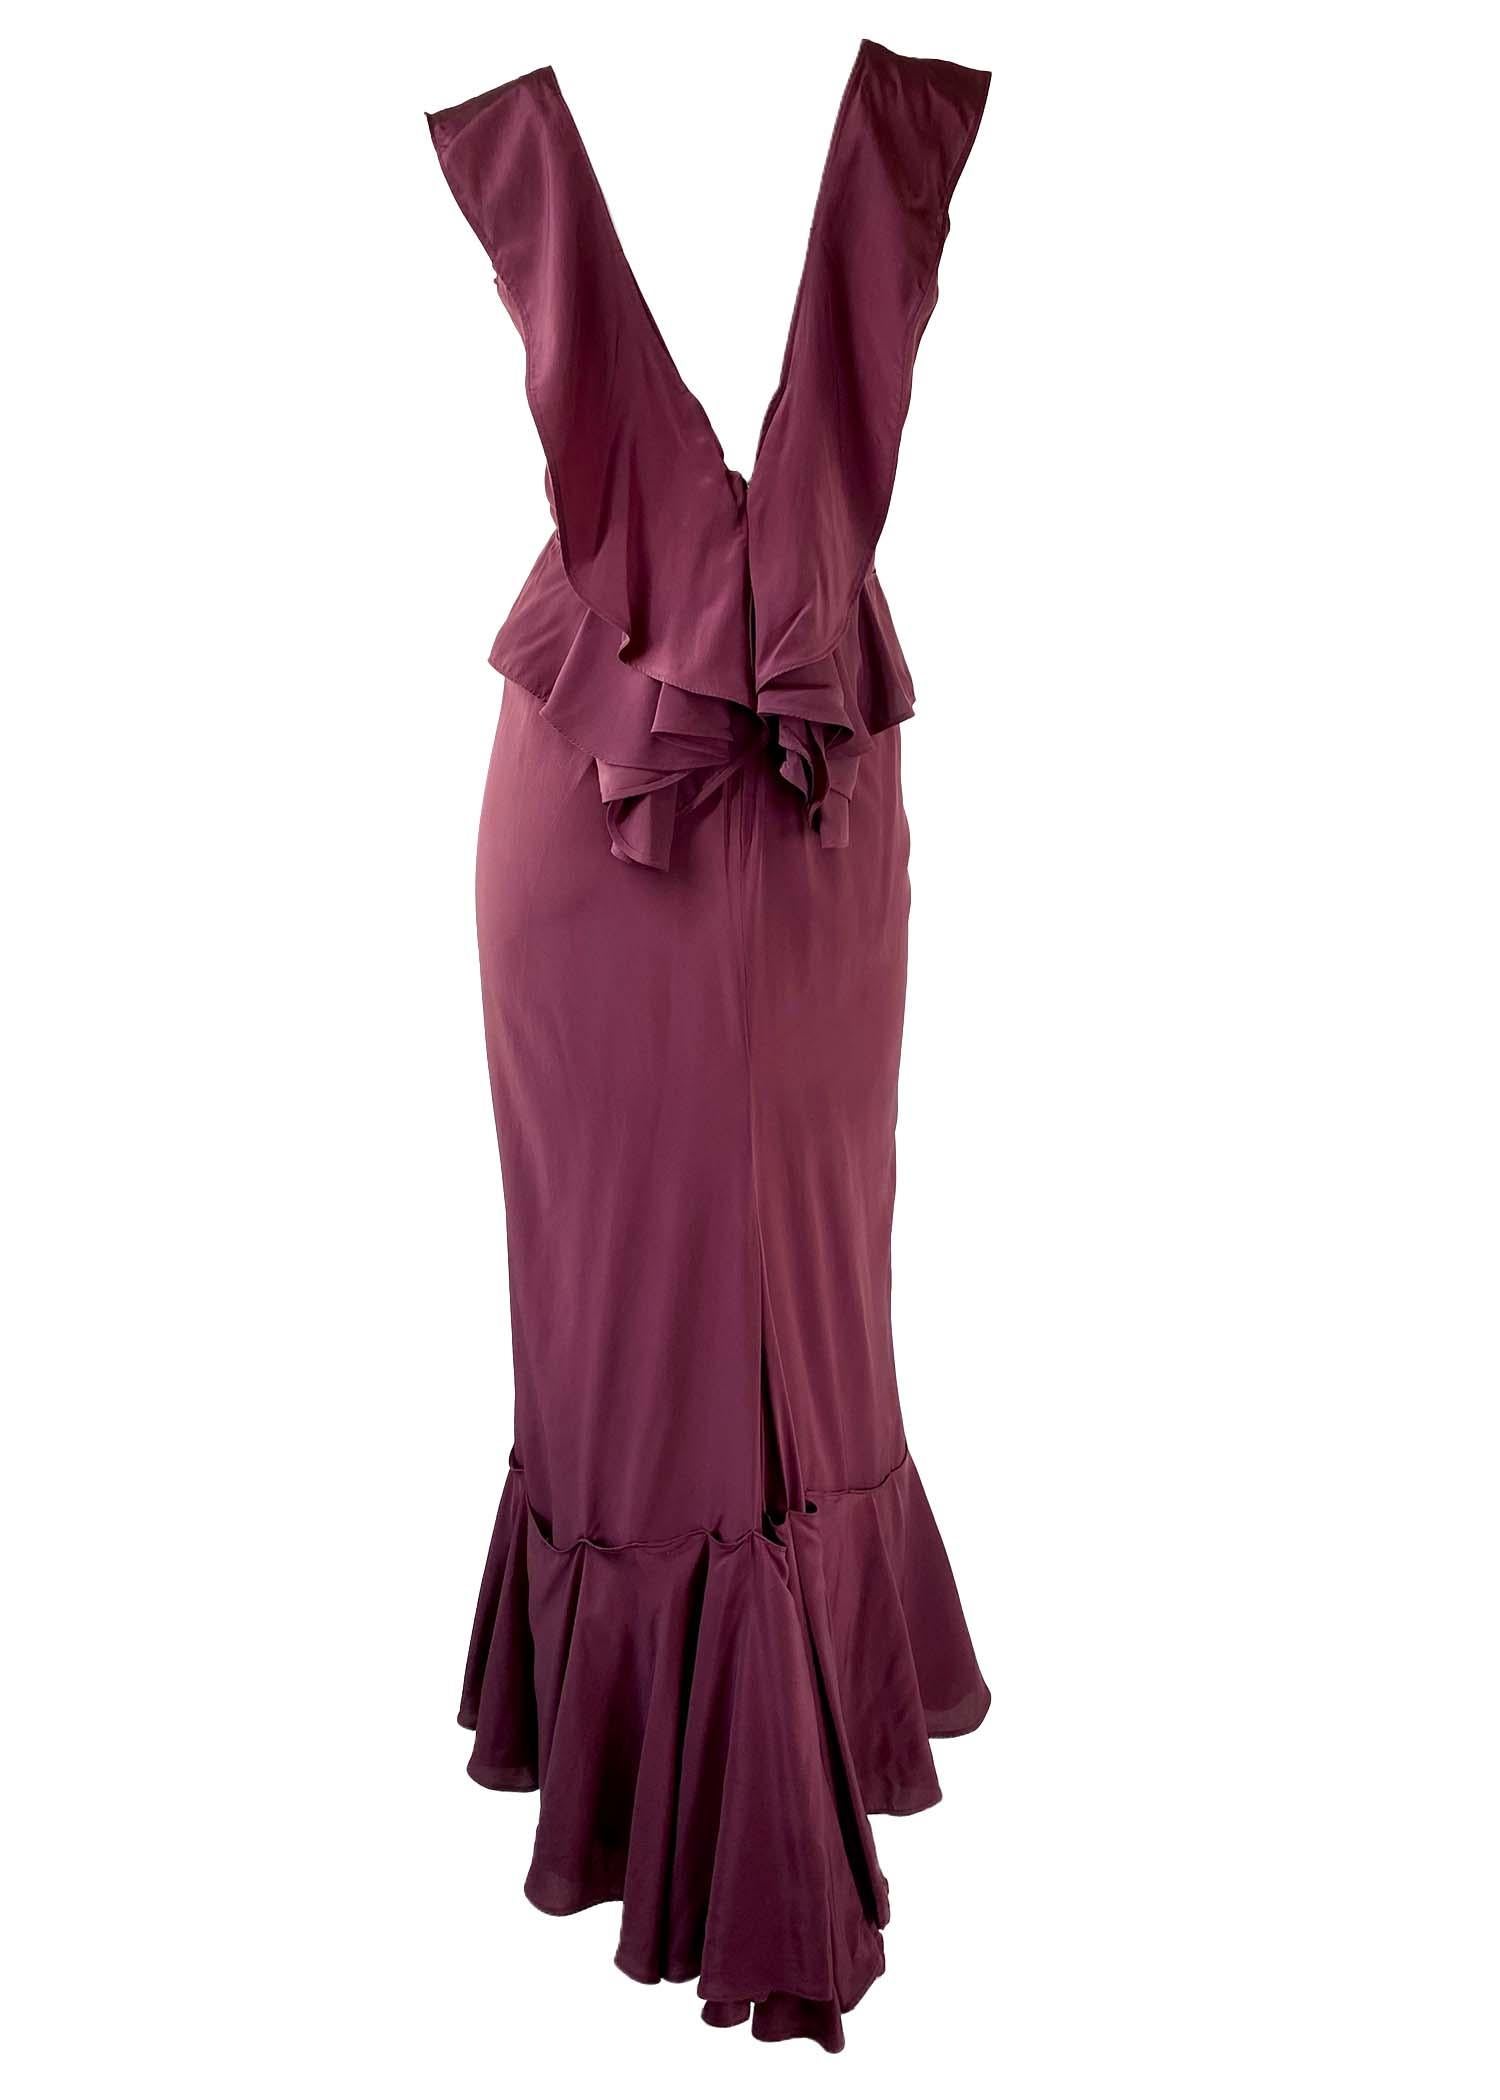 F/W 2003 Yves Saint Laurent by Tom Ford Maroon Silk Ruffle Rive Gauche Gown In Excellent Condition For Sale In West Hollywood, CA